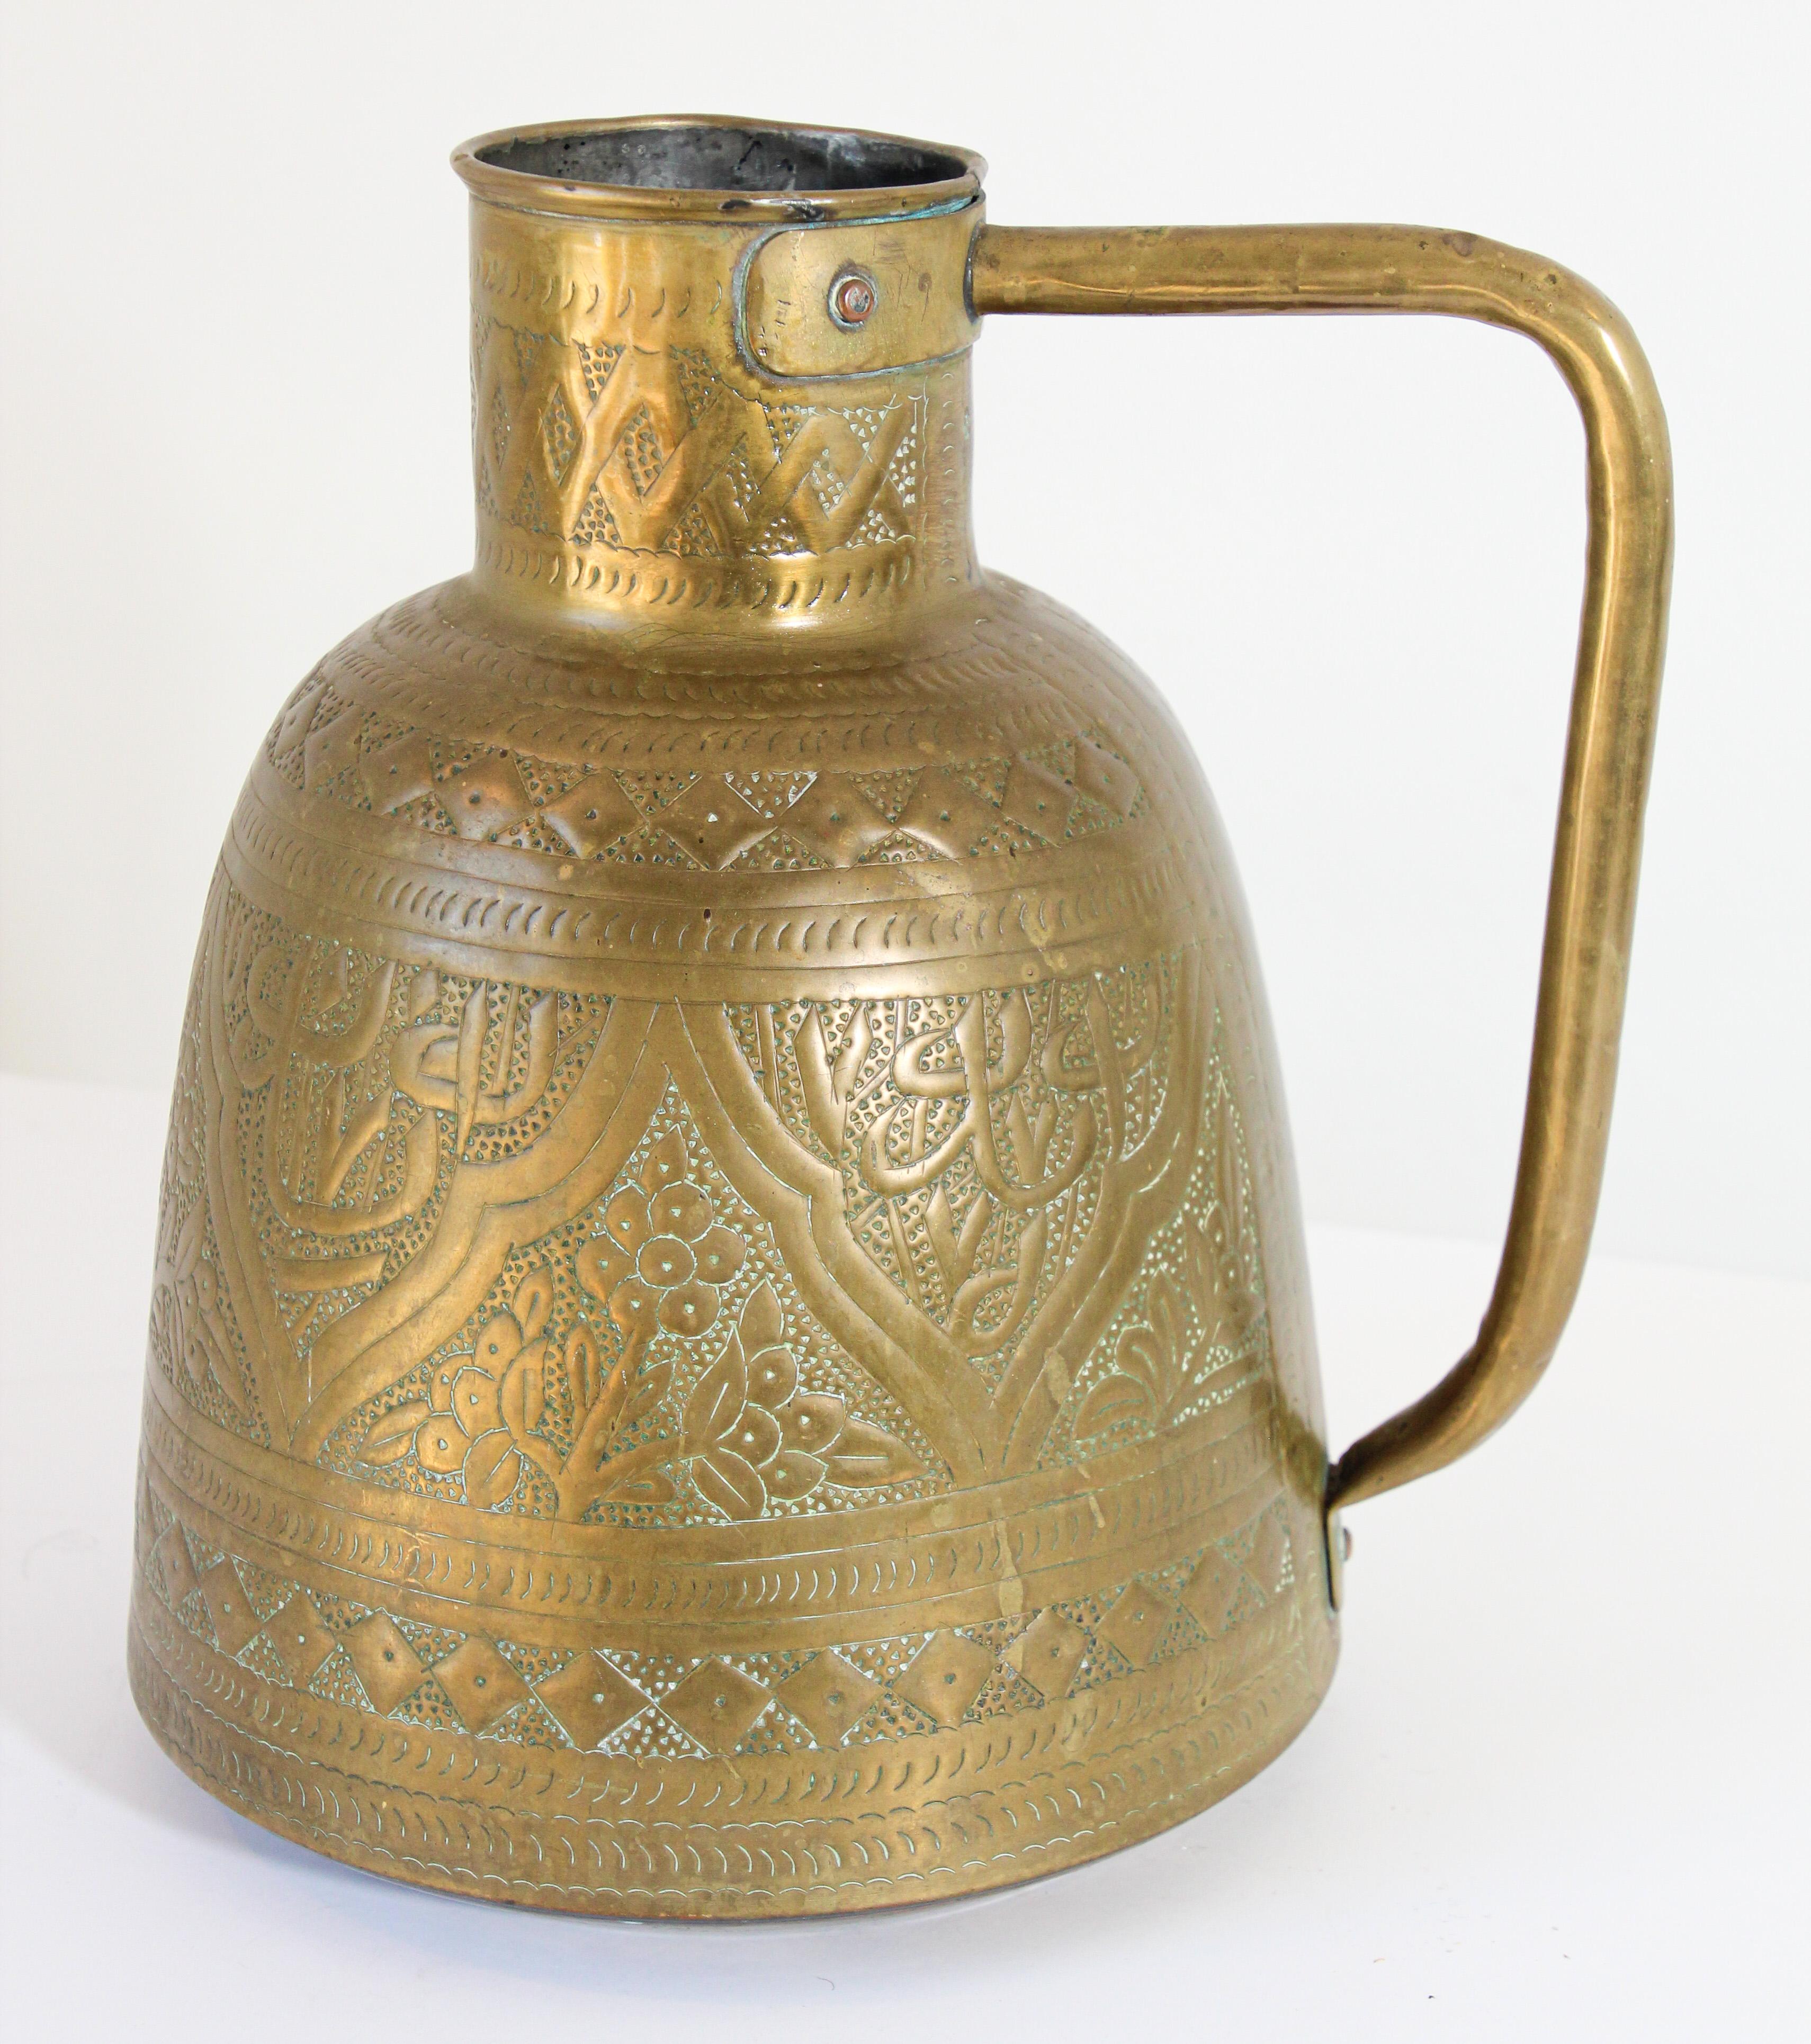 Middle Eastern Asian traditional water pot.
Hand-hammered with Arabic writting and chased brass with riveted brass handle.
Small bird as final on top of the cover.
Great decorative Islamic art collector Dallah metalwork object.
Well used nice